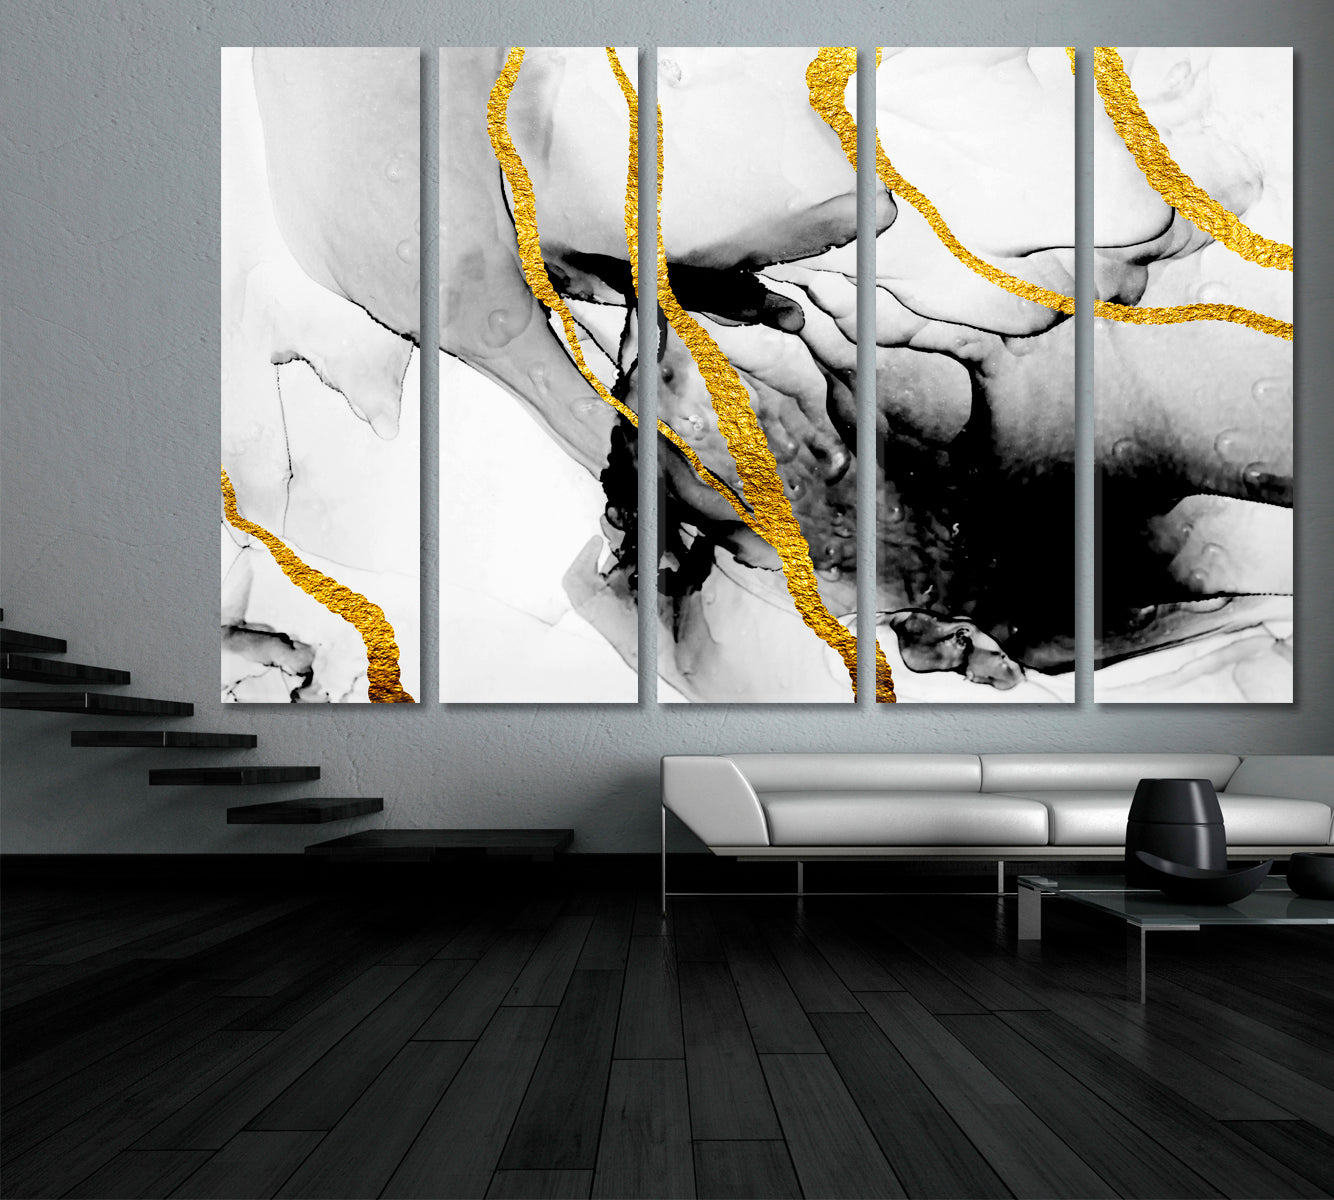 ABSTRACT CLOUDS ART & INK Black White Gold Marble Fluid Art, Oriental Marbling Canvas Print Artesty 5 panels 36" x 24" 